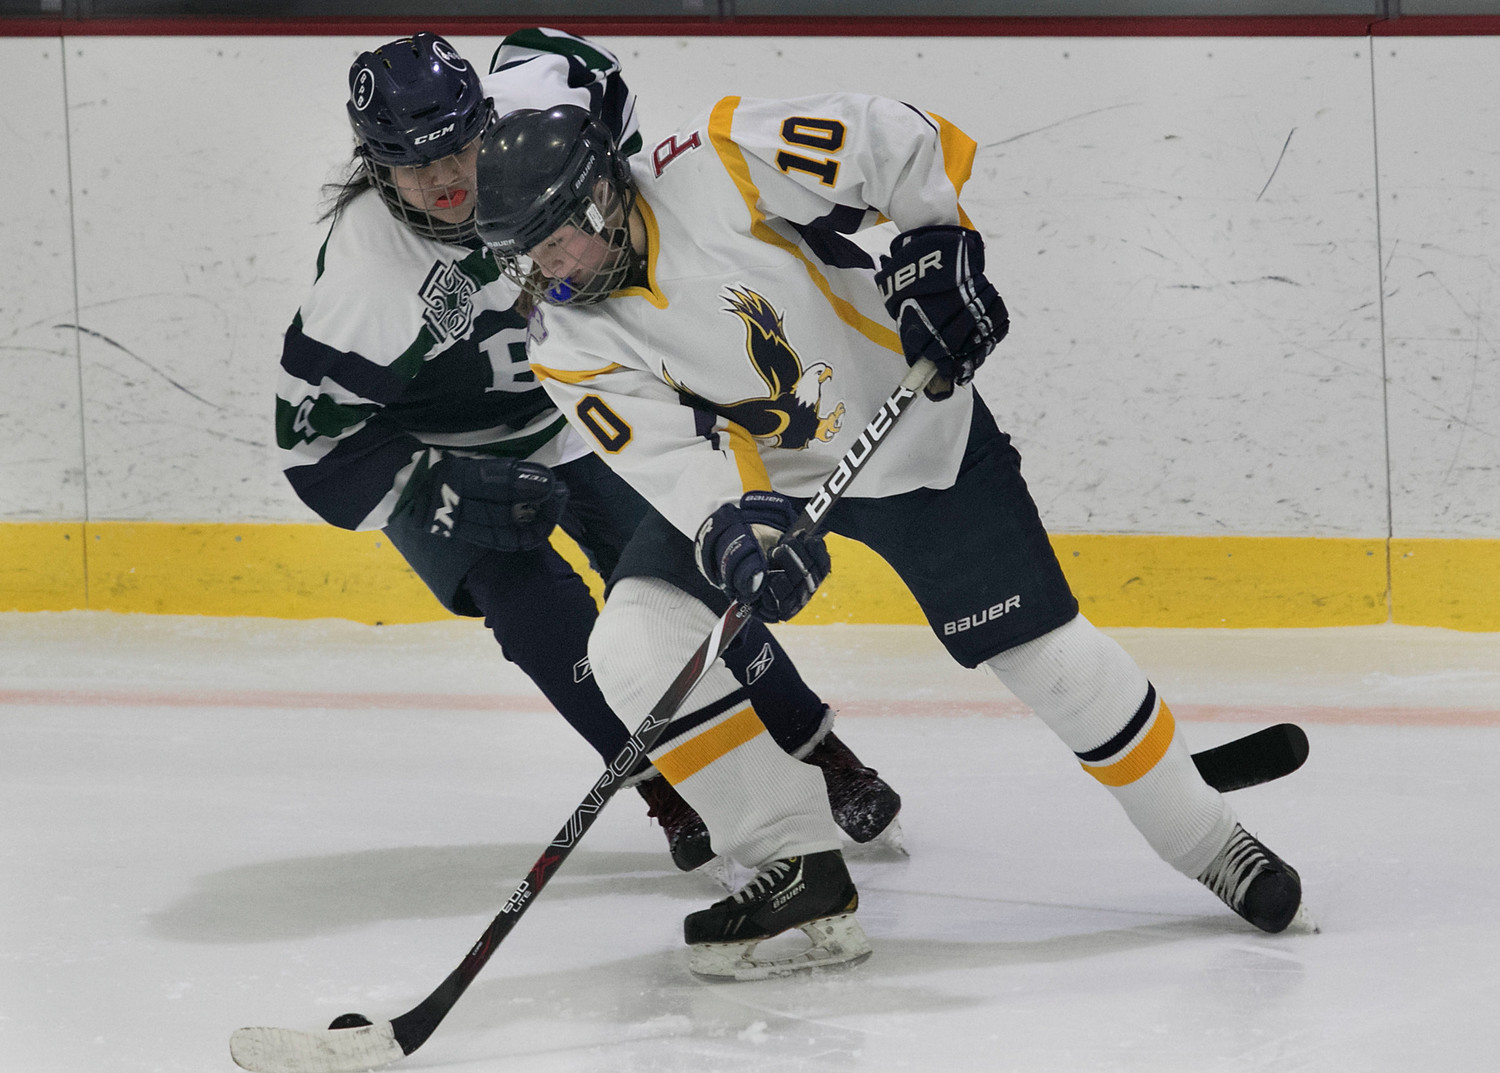 East Bay defenseman Madelyn Cox skates the puck into the offensive zone. She scored a goal and assisted on another during the game.